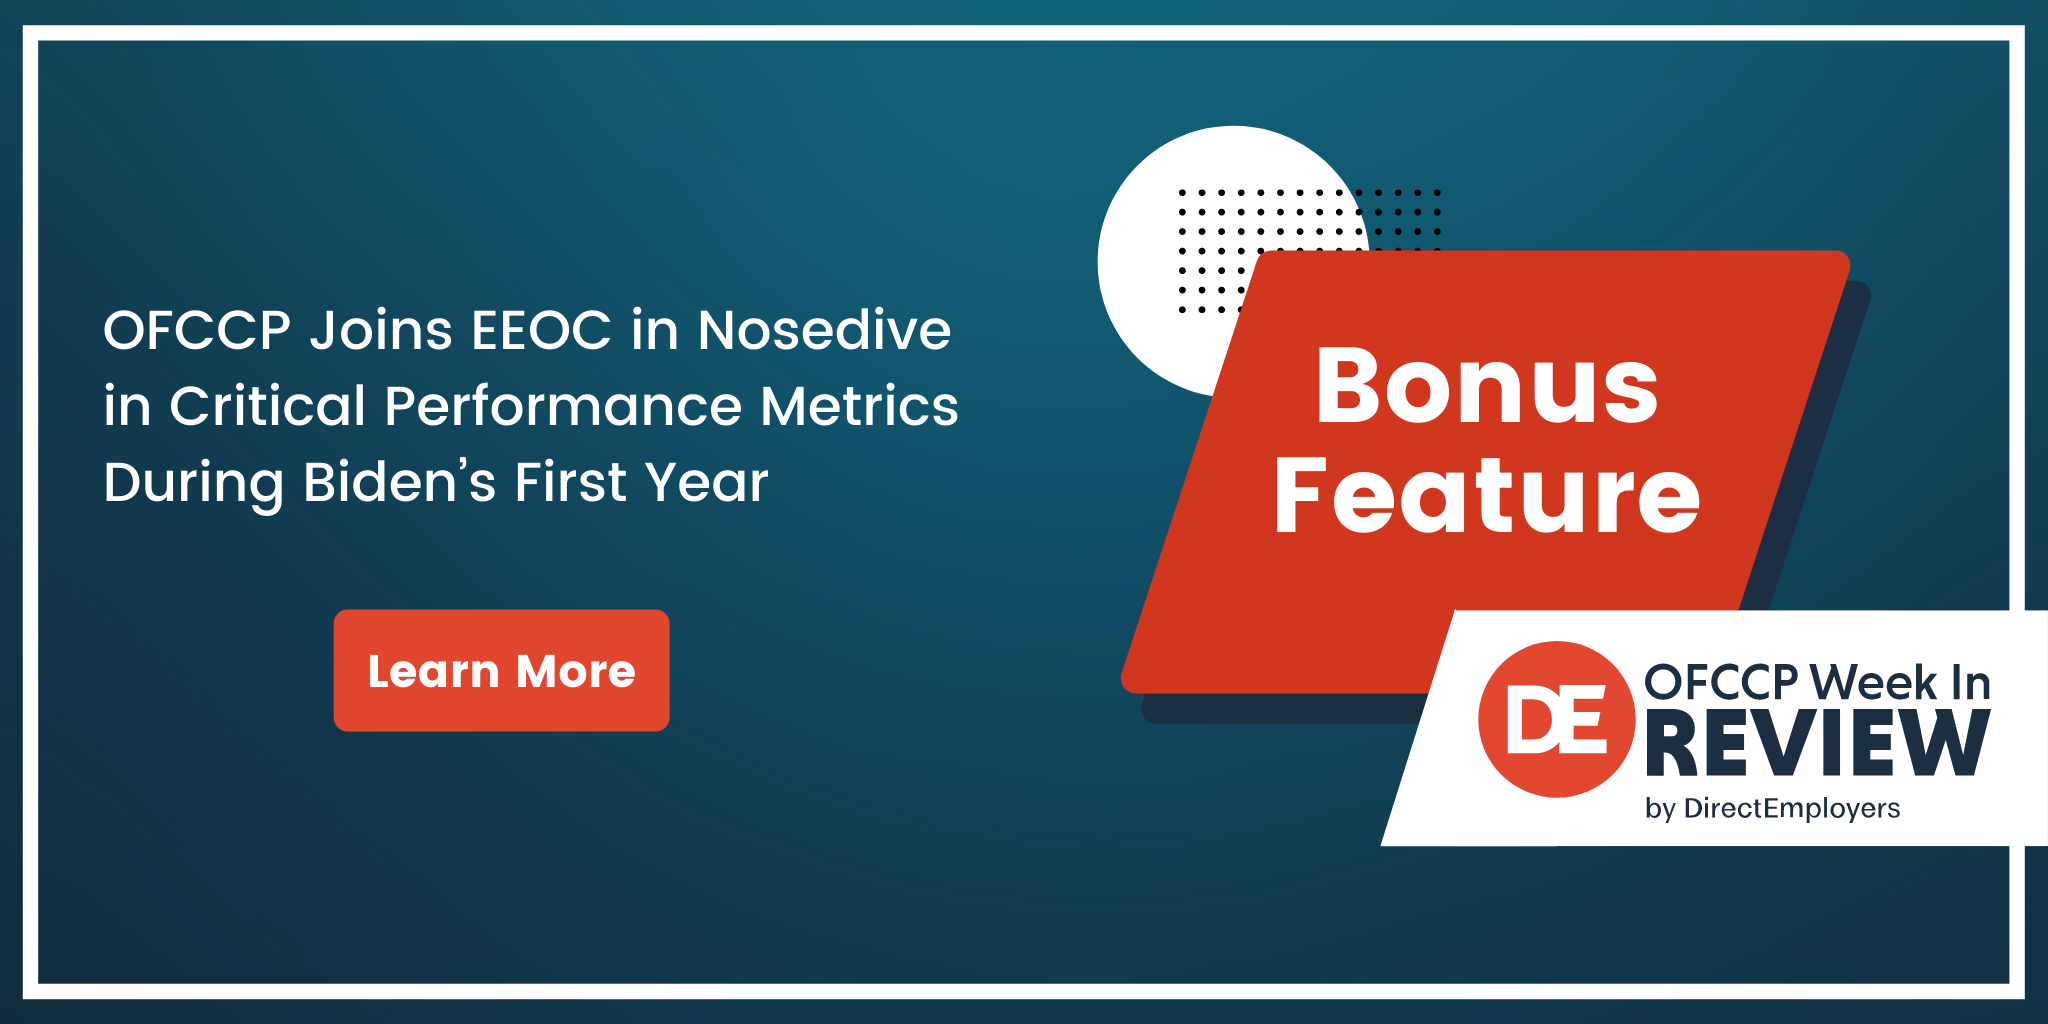 OFCCP Week In Review Bonus Feature: OFCCP Joins EEOC in Nosedive in Critical Performance Metrics During Biden’s First Year